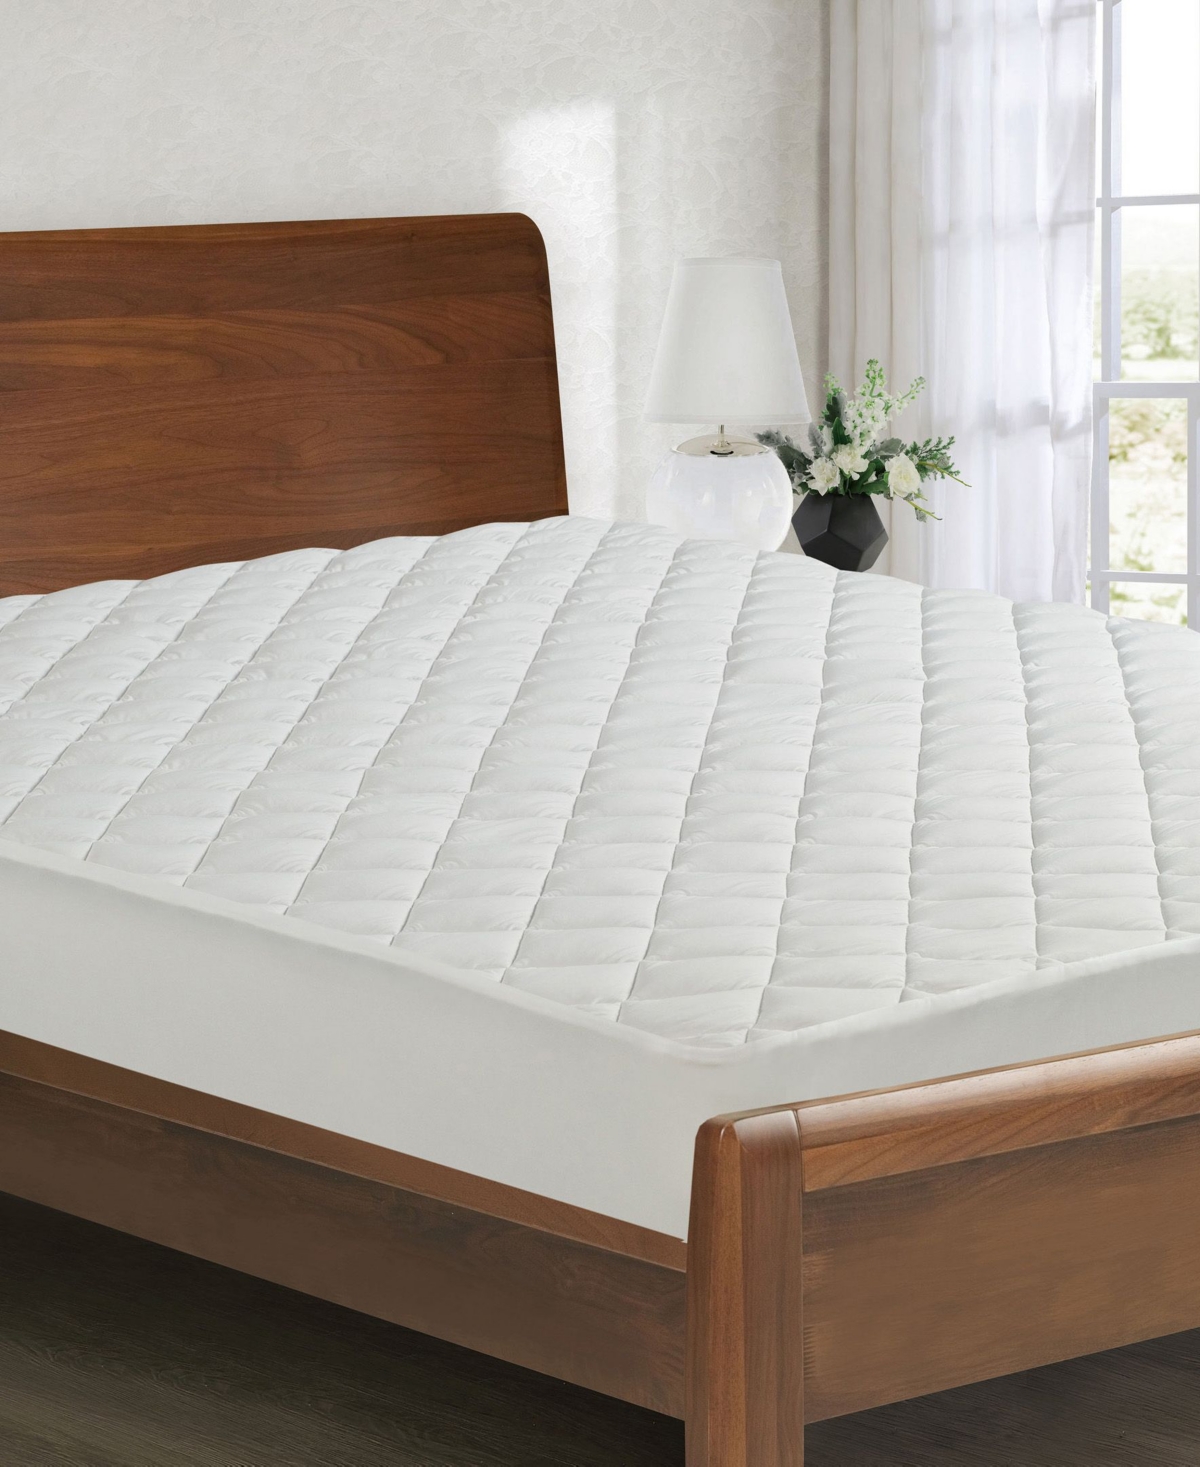 All-In-One Performance Stretch Moisture Wicking Fitted Mattress Pad, California King